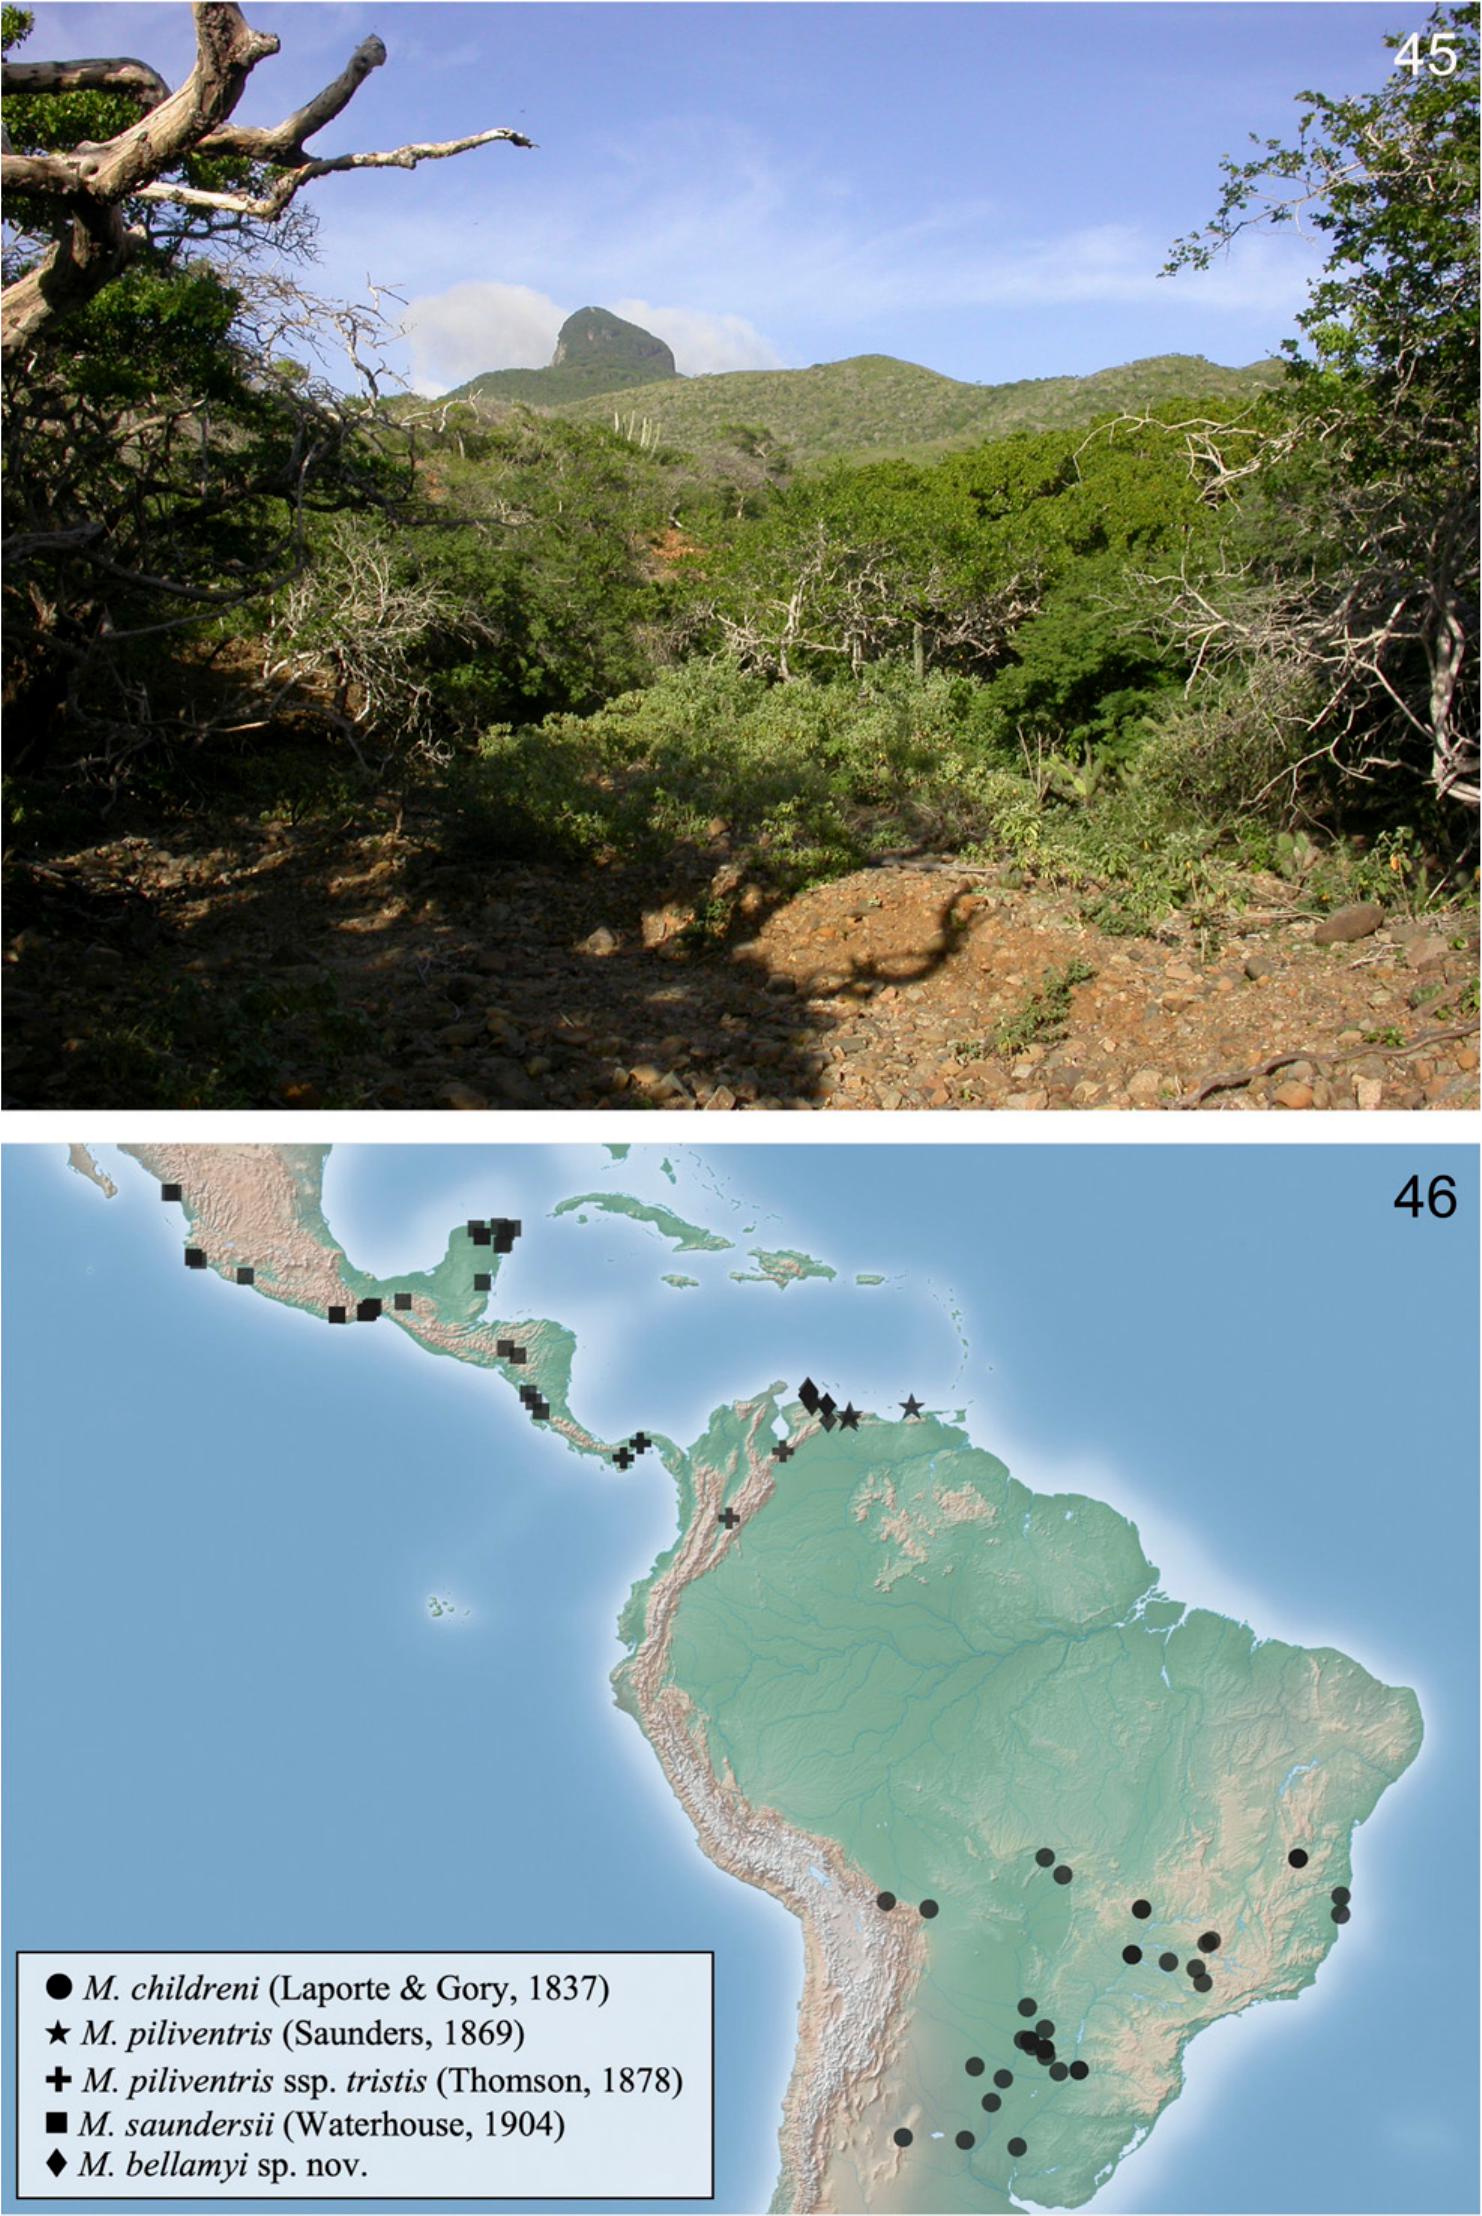 A review of the genus Mimicoclytrina Bellamy, 2003 (Coleoptera Buprestidae) and description of a new species from northwestern Venezuela